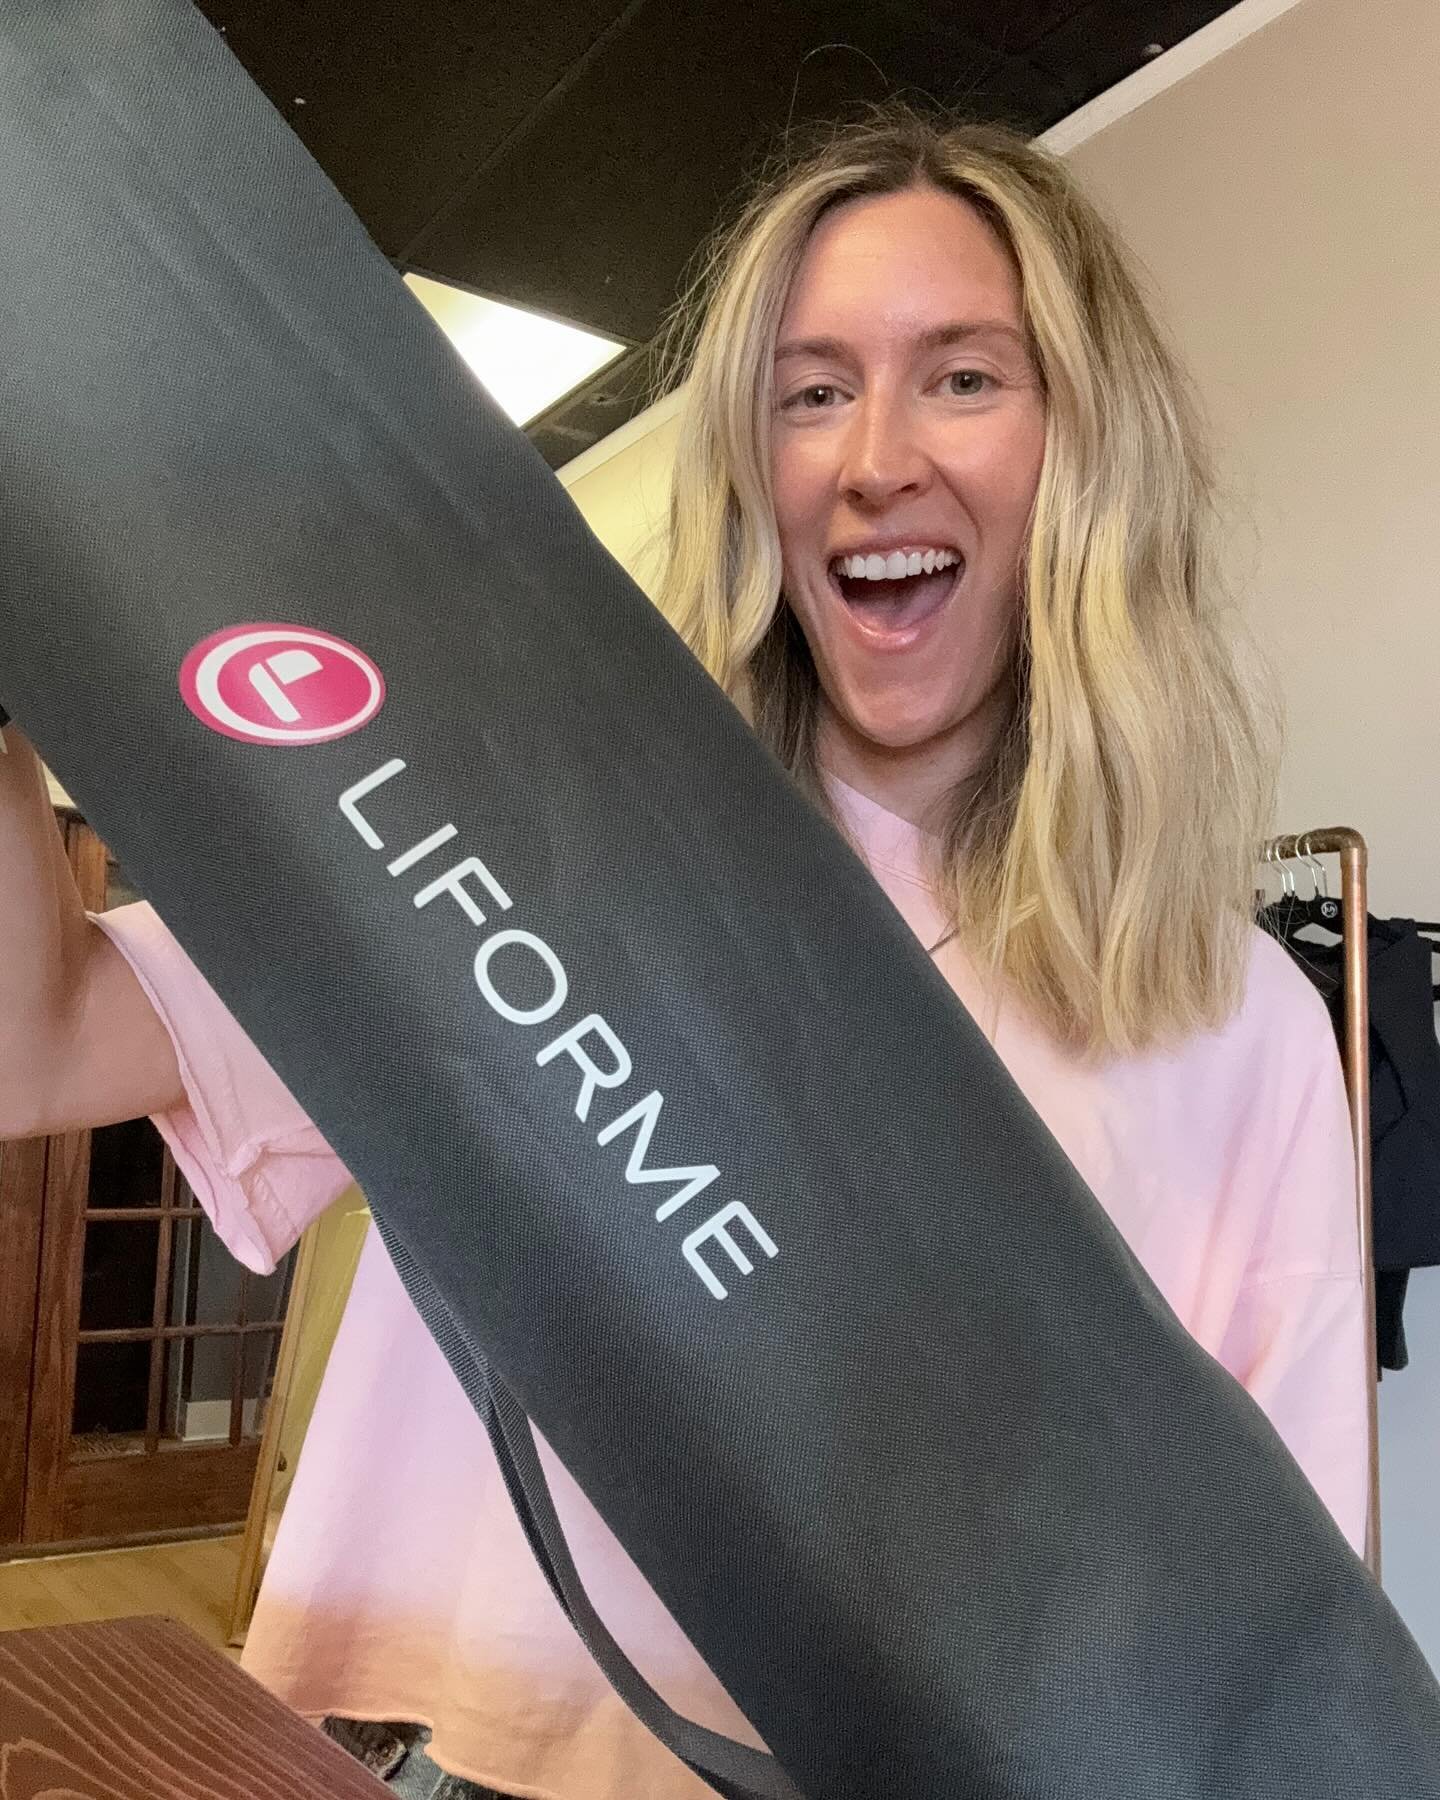 🌈 𝗚𝗜𝗩𝗘𝗔𝗪𝗔𝗬 !!! 🙌🏼

As a thank you to our incredible community we want to give away a brand new @liforme lotus mat! 🪷 ($185 value!) Swipe to see a picture 🤩 To be entered to win is simple! If you&rsquo;ve taken a class with us &amp; enjoy